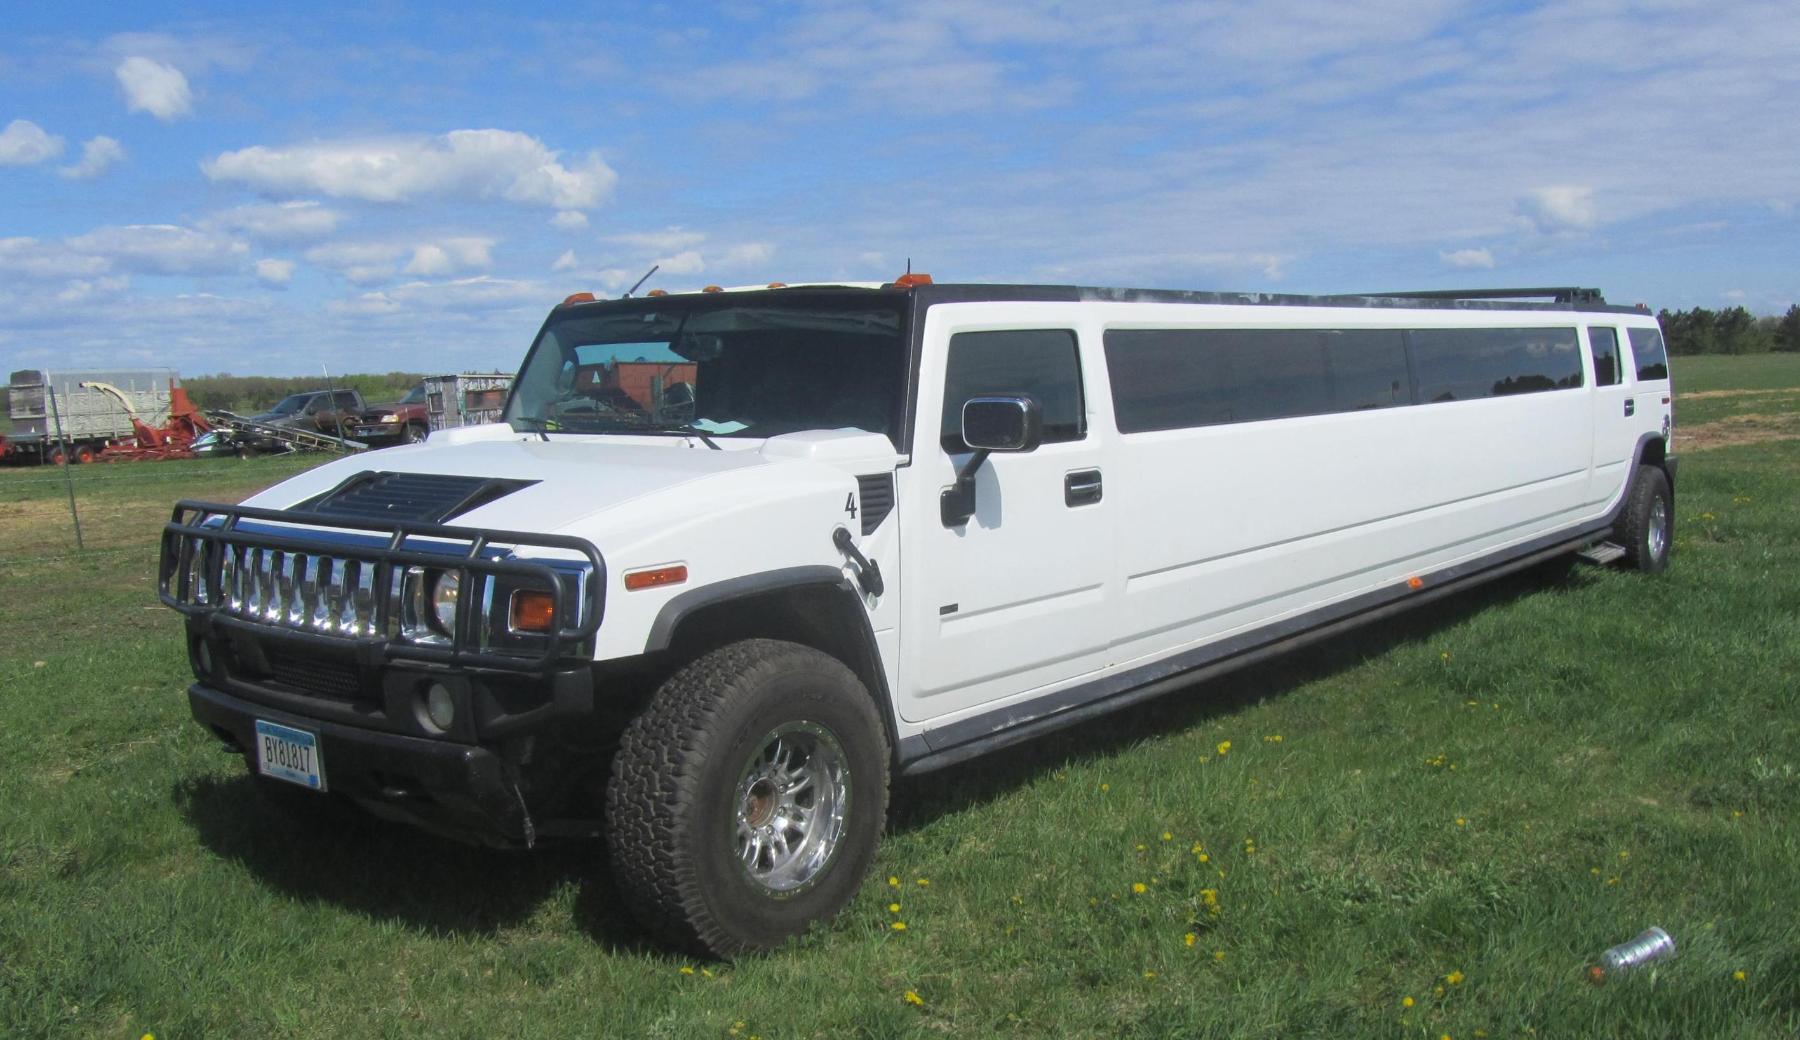 Limos and Party Buses: Pillager, MN